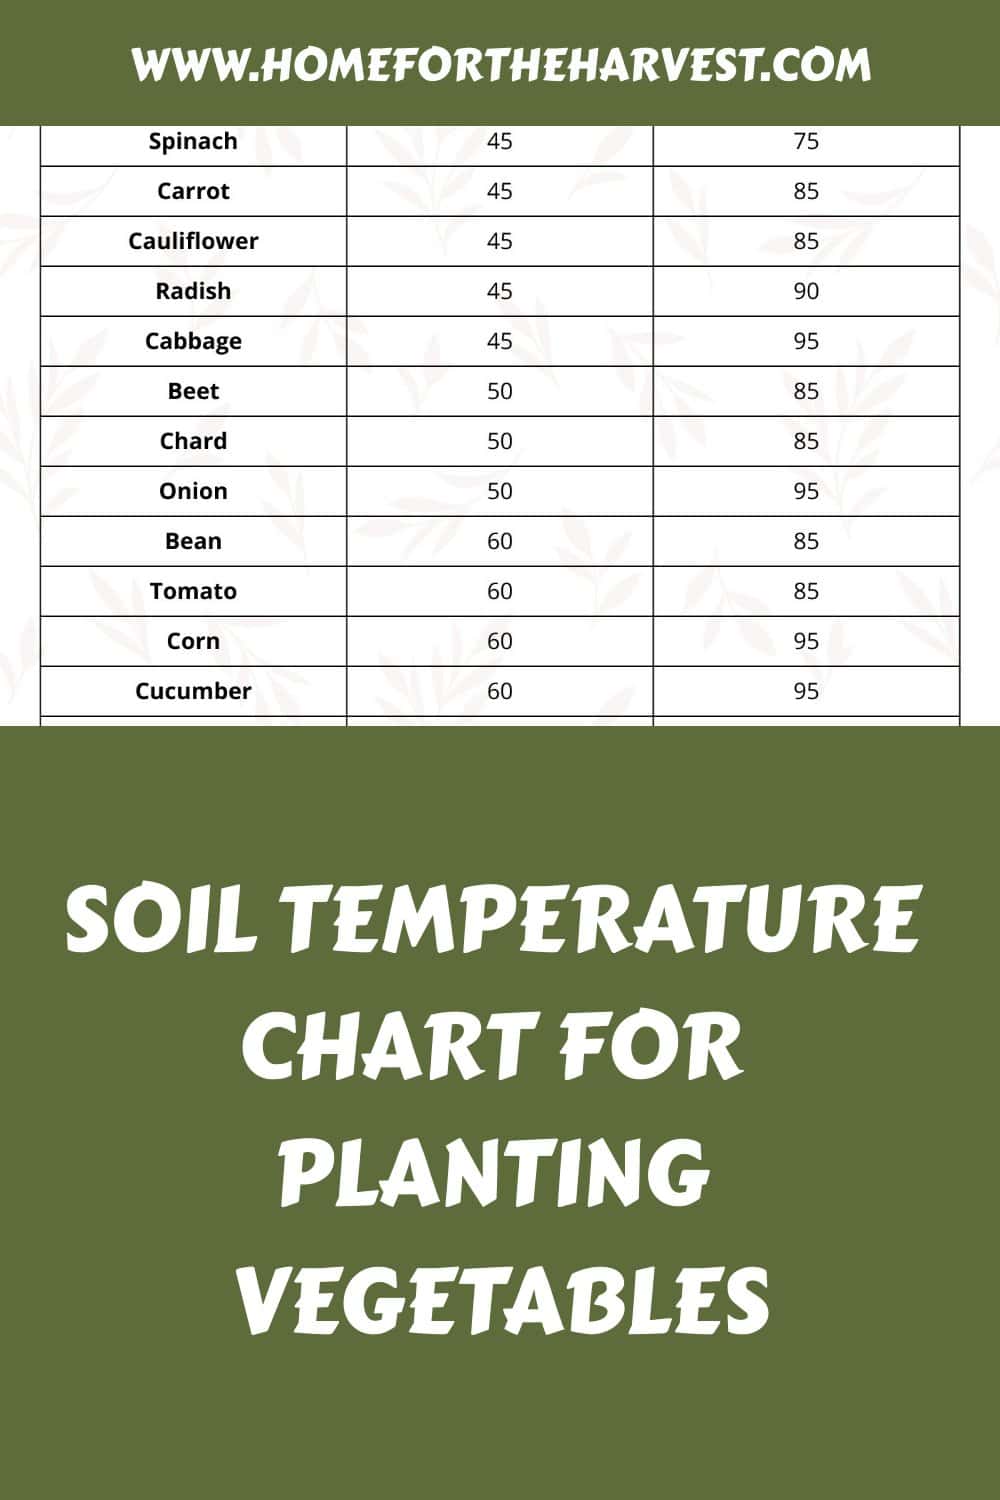 Soil temperature chart for planting vegetables generated pin 55859